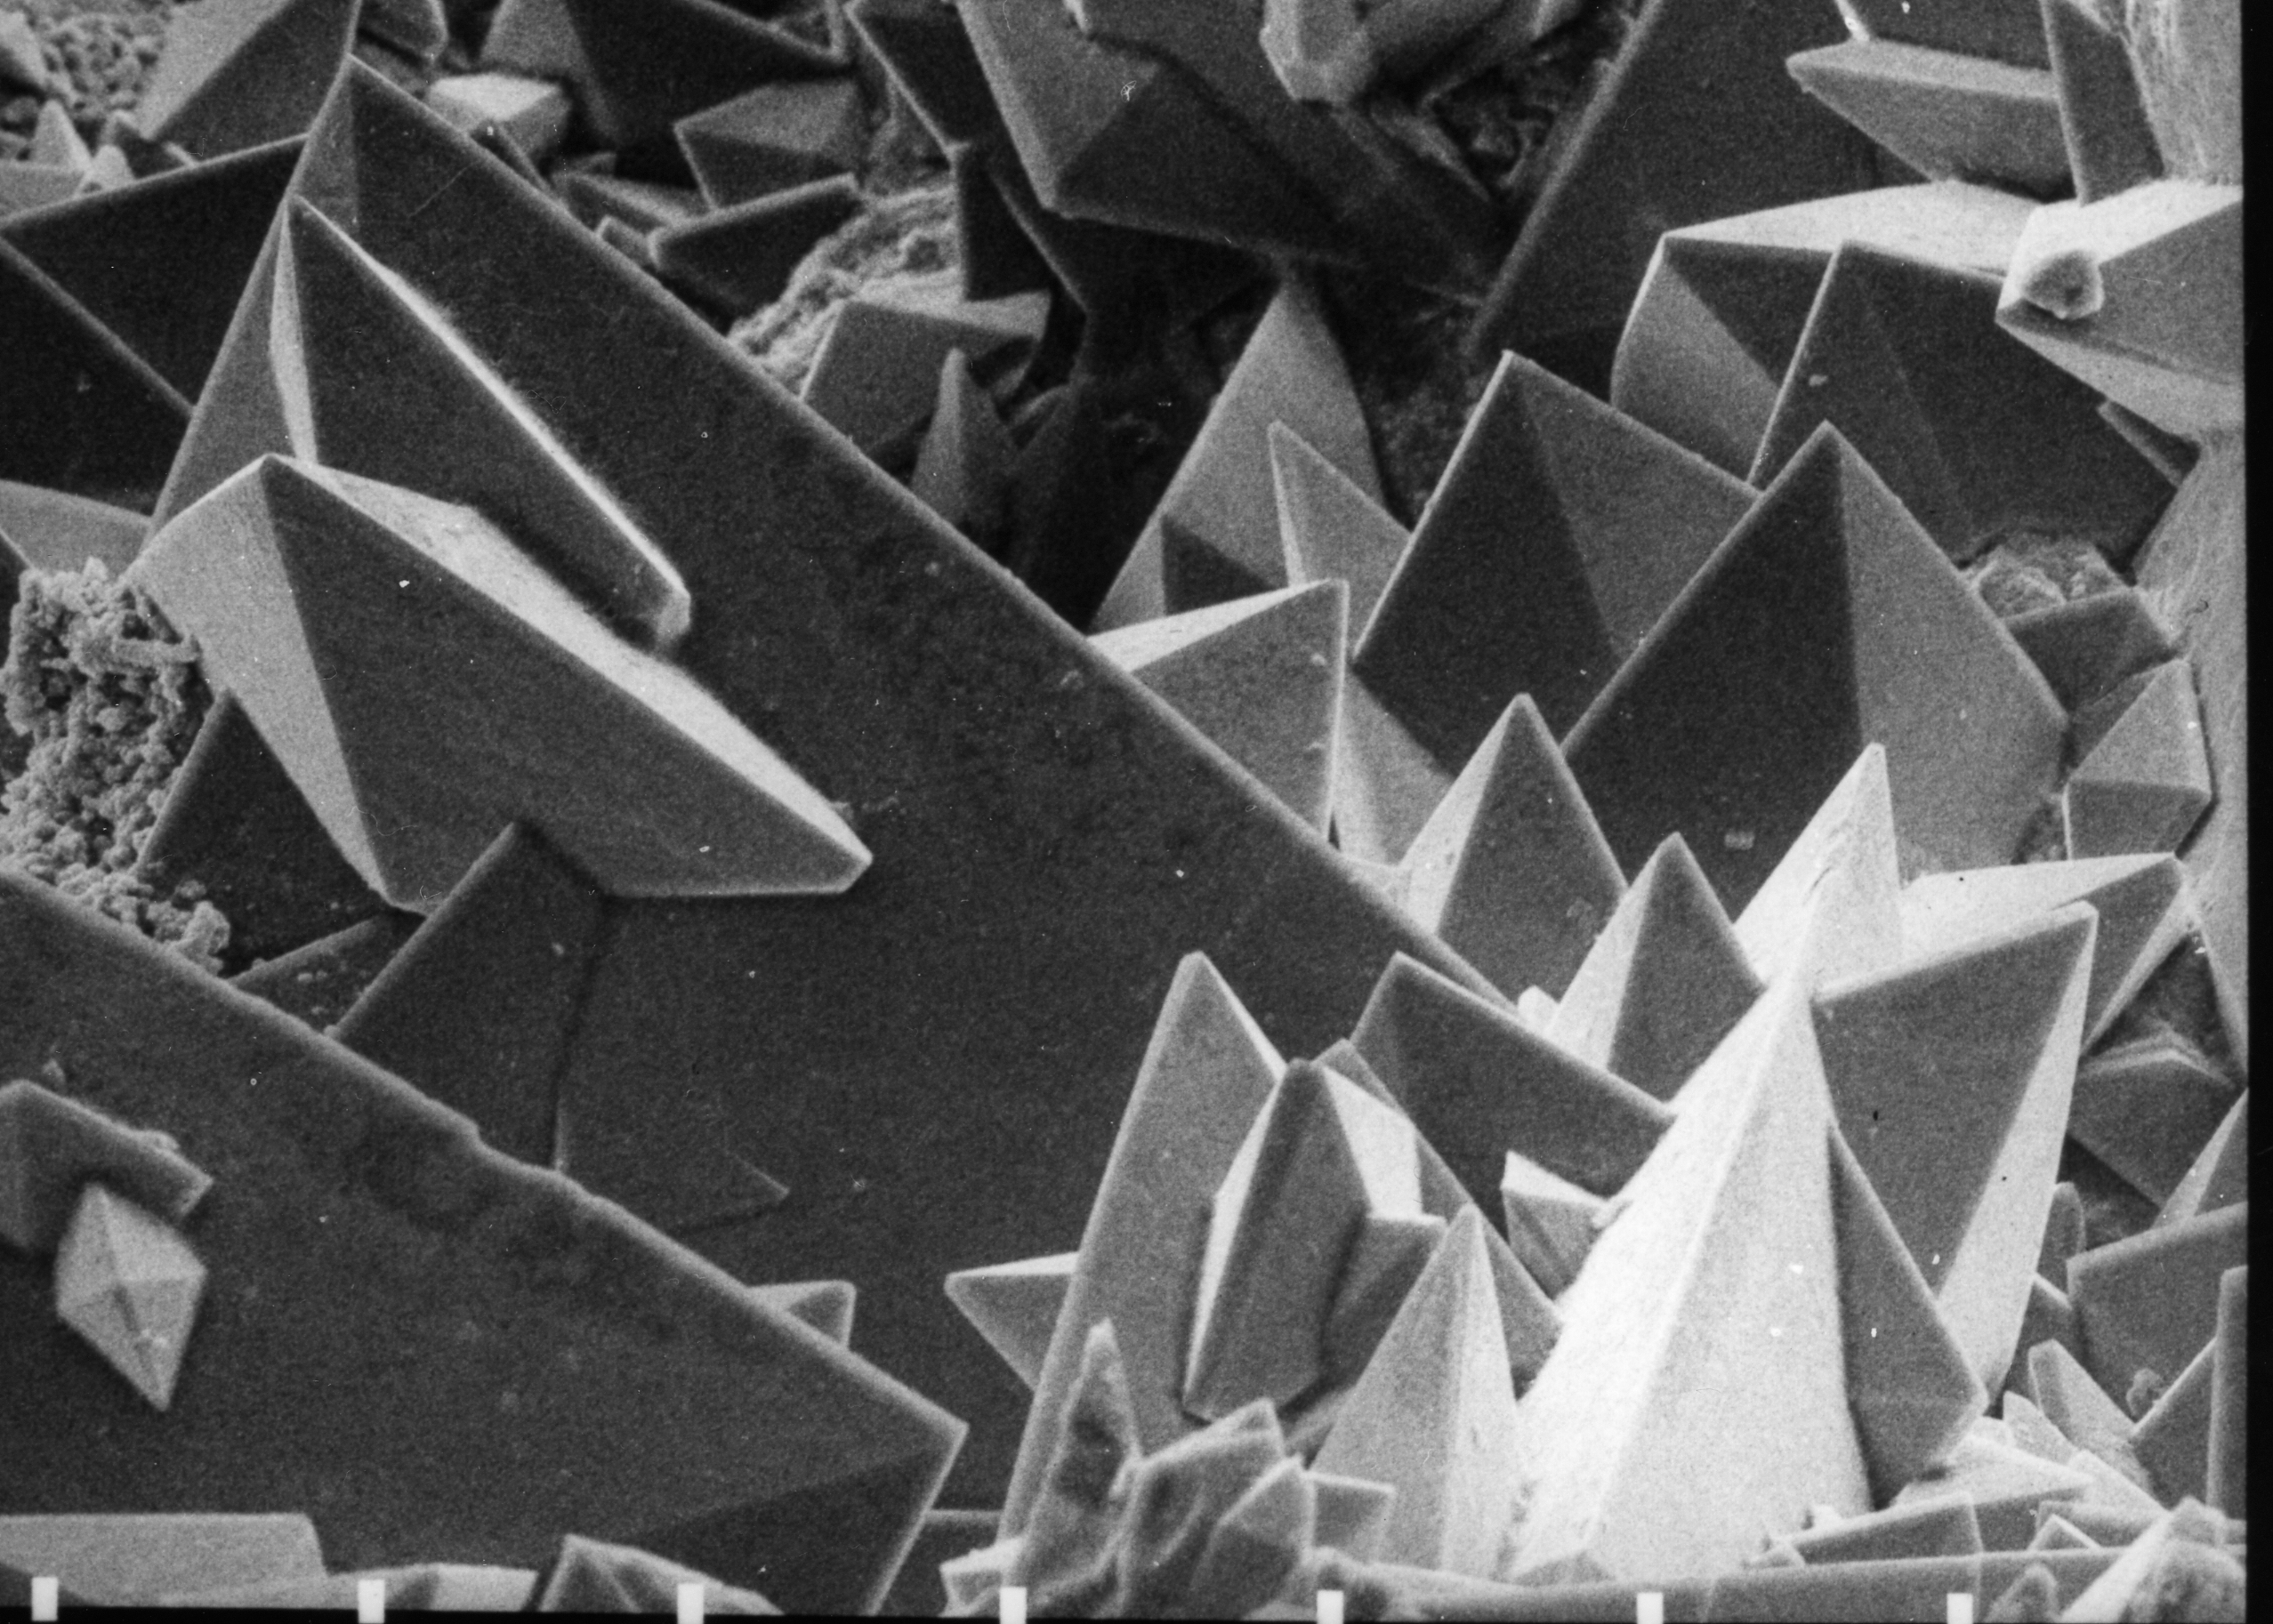 Calcium oxalate dihydrate crystals under Scanning Electron Micrograph (SEM) taken at 30 KV. Source: Wikimedia commons[20]